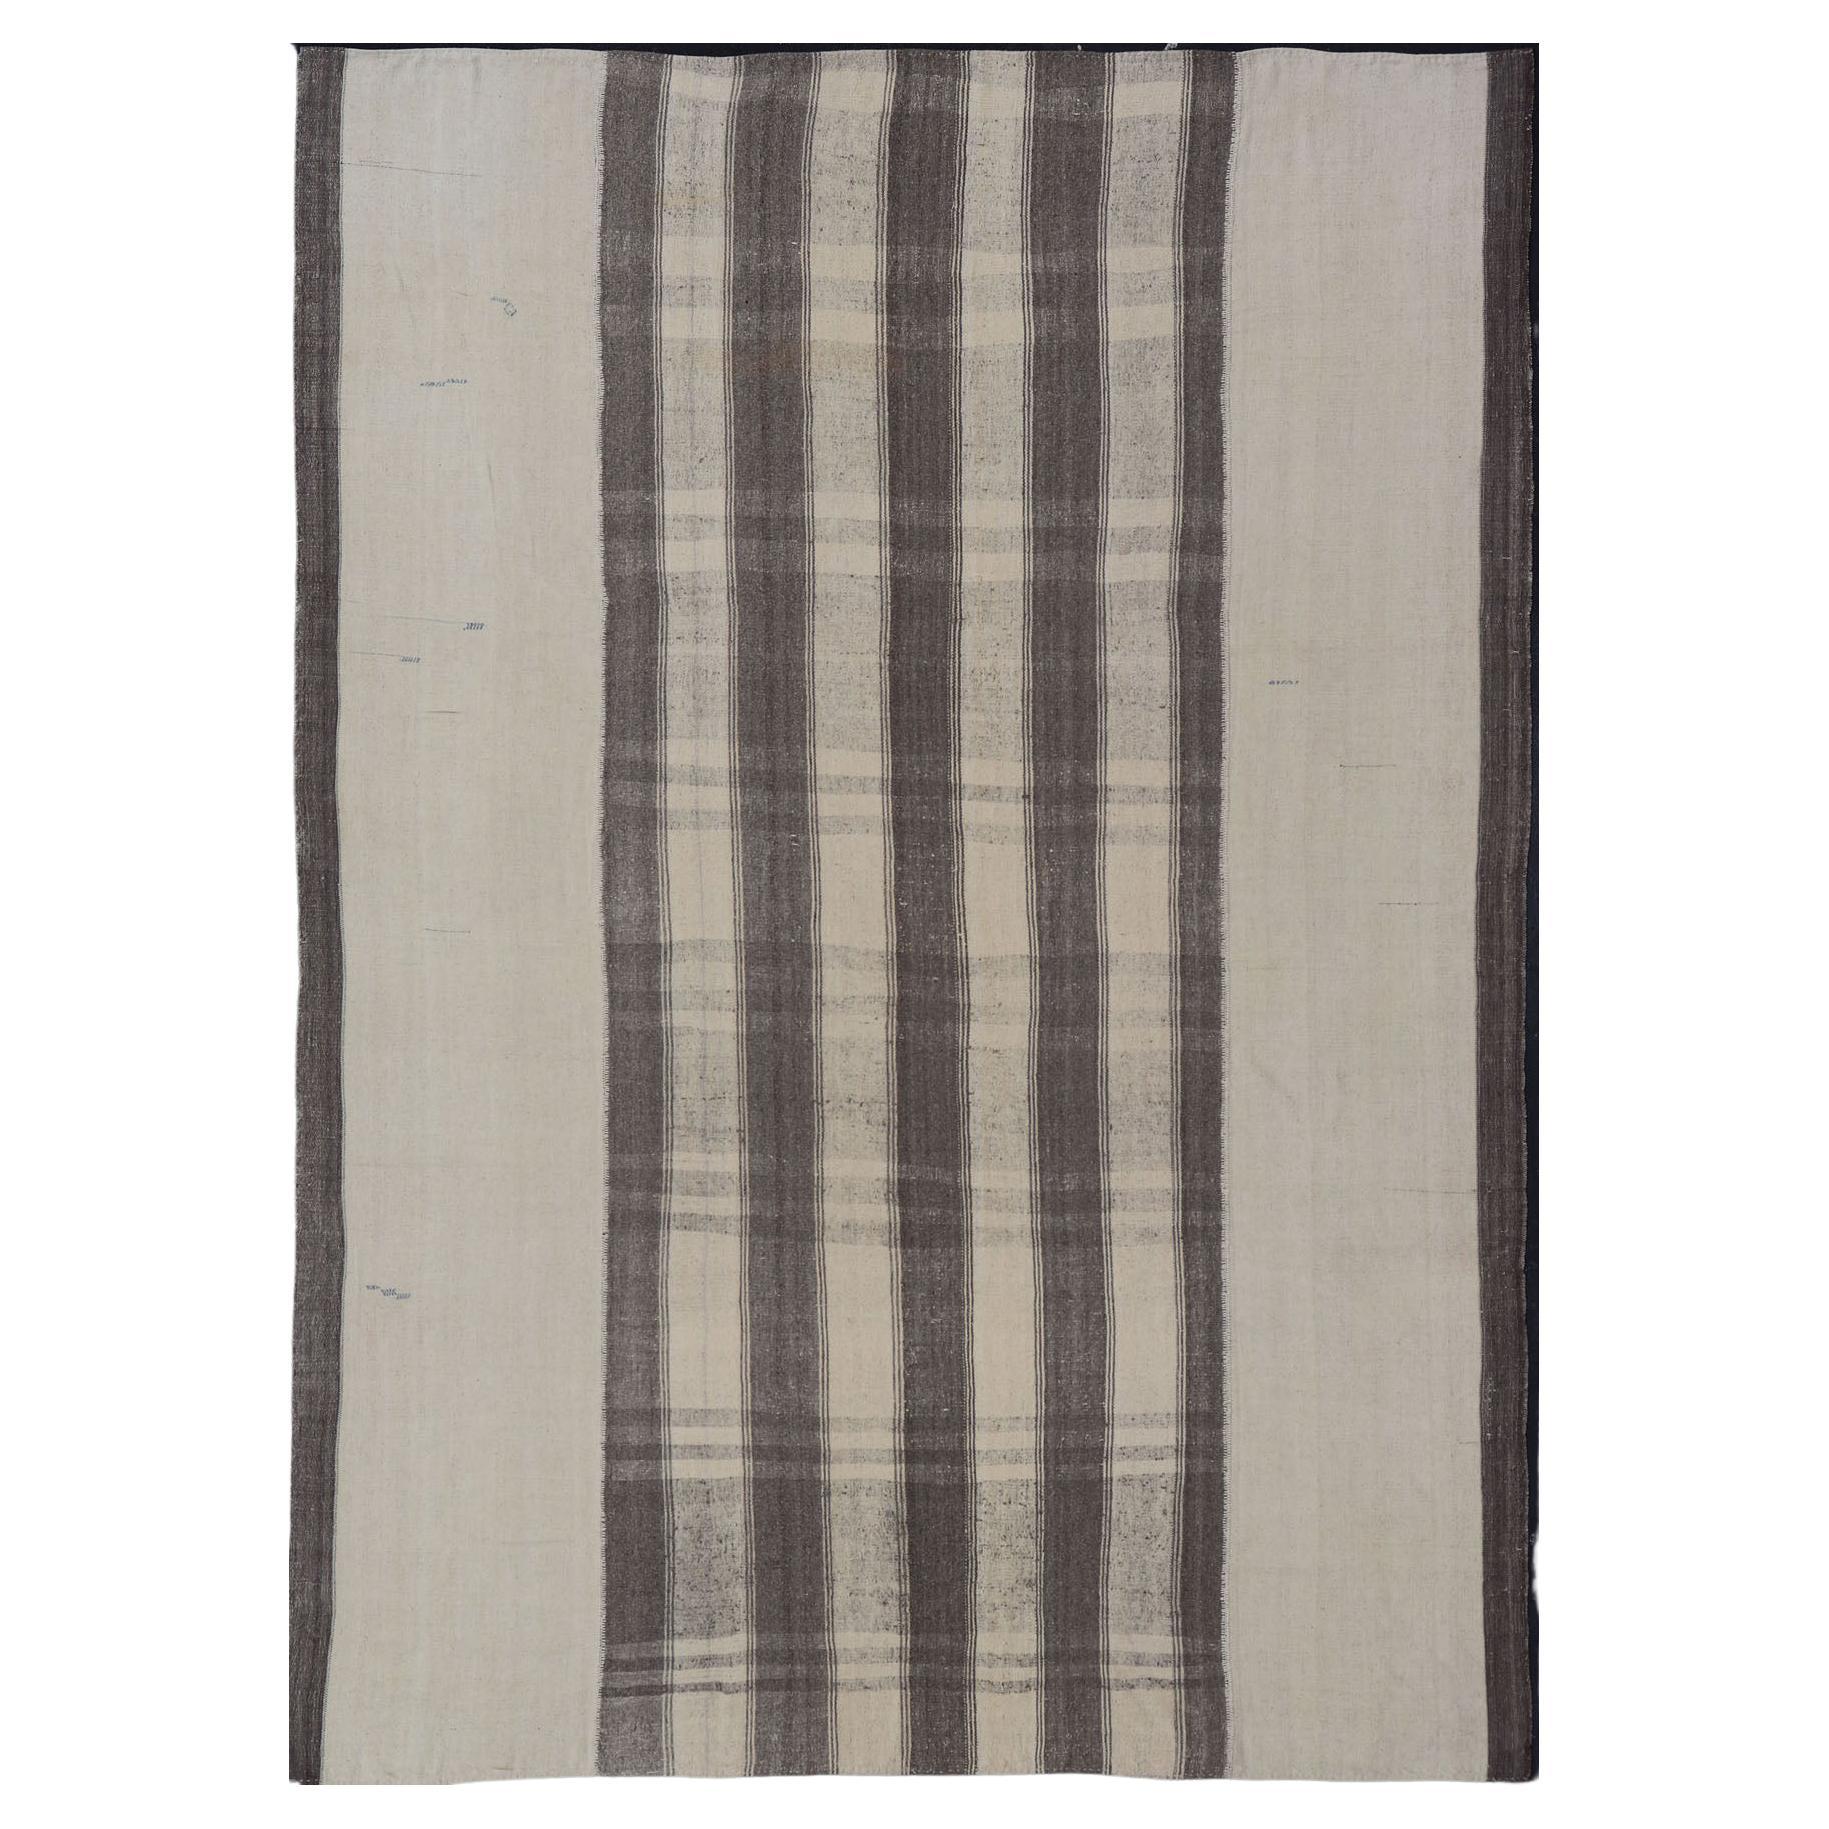 Large Hand Woven Vintage Turkish Kilim Rug with Stripes in Grey, White & Cream